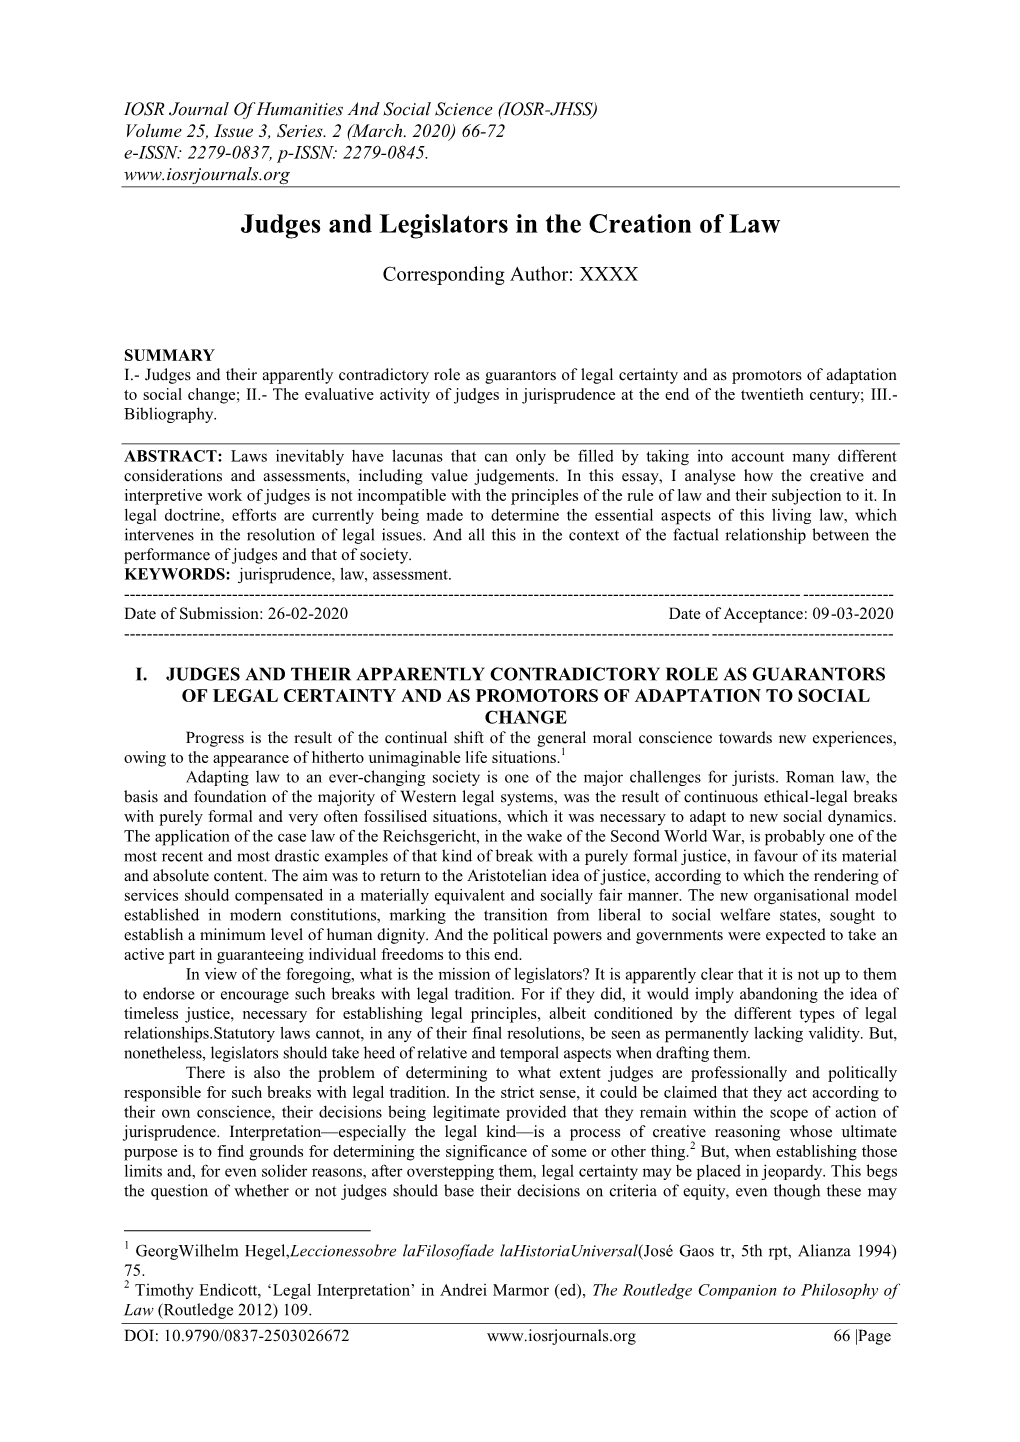 Judges and Legislators in the Creation of Law